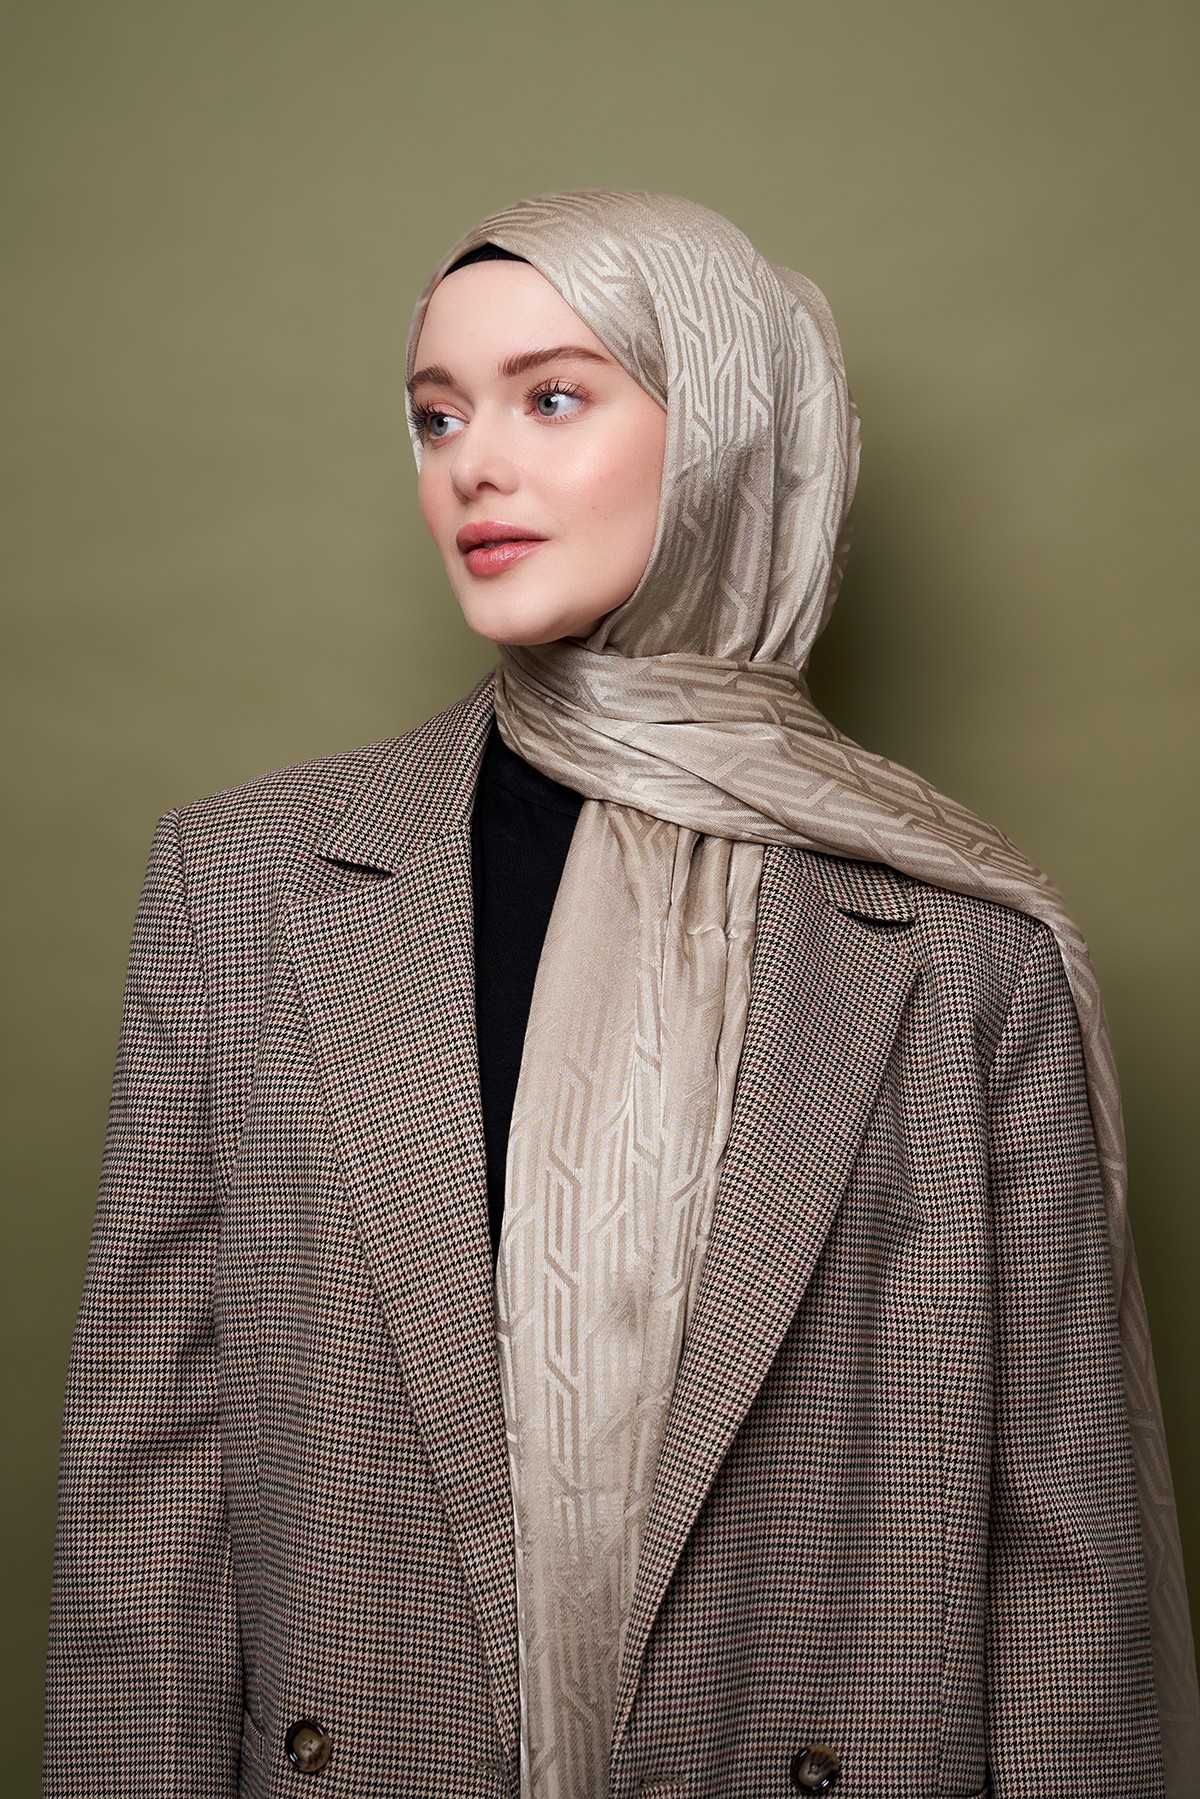 Harmony Jacquard Series Knitted Pattern Shawl - Antique Beige